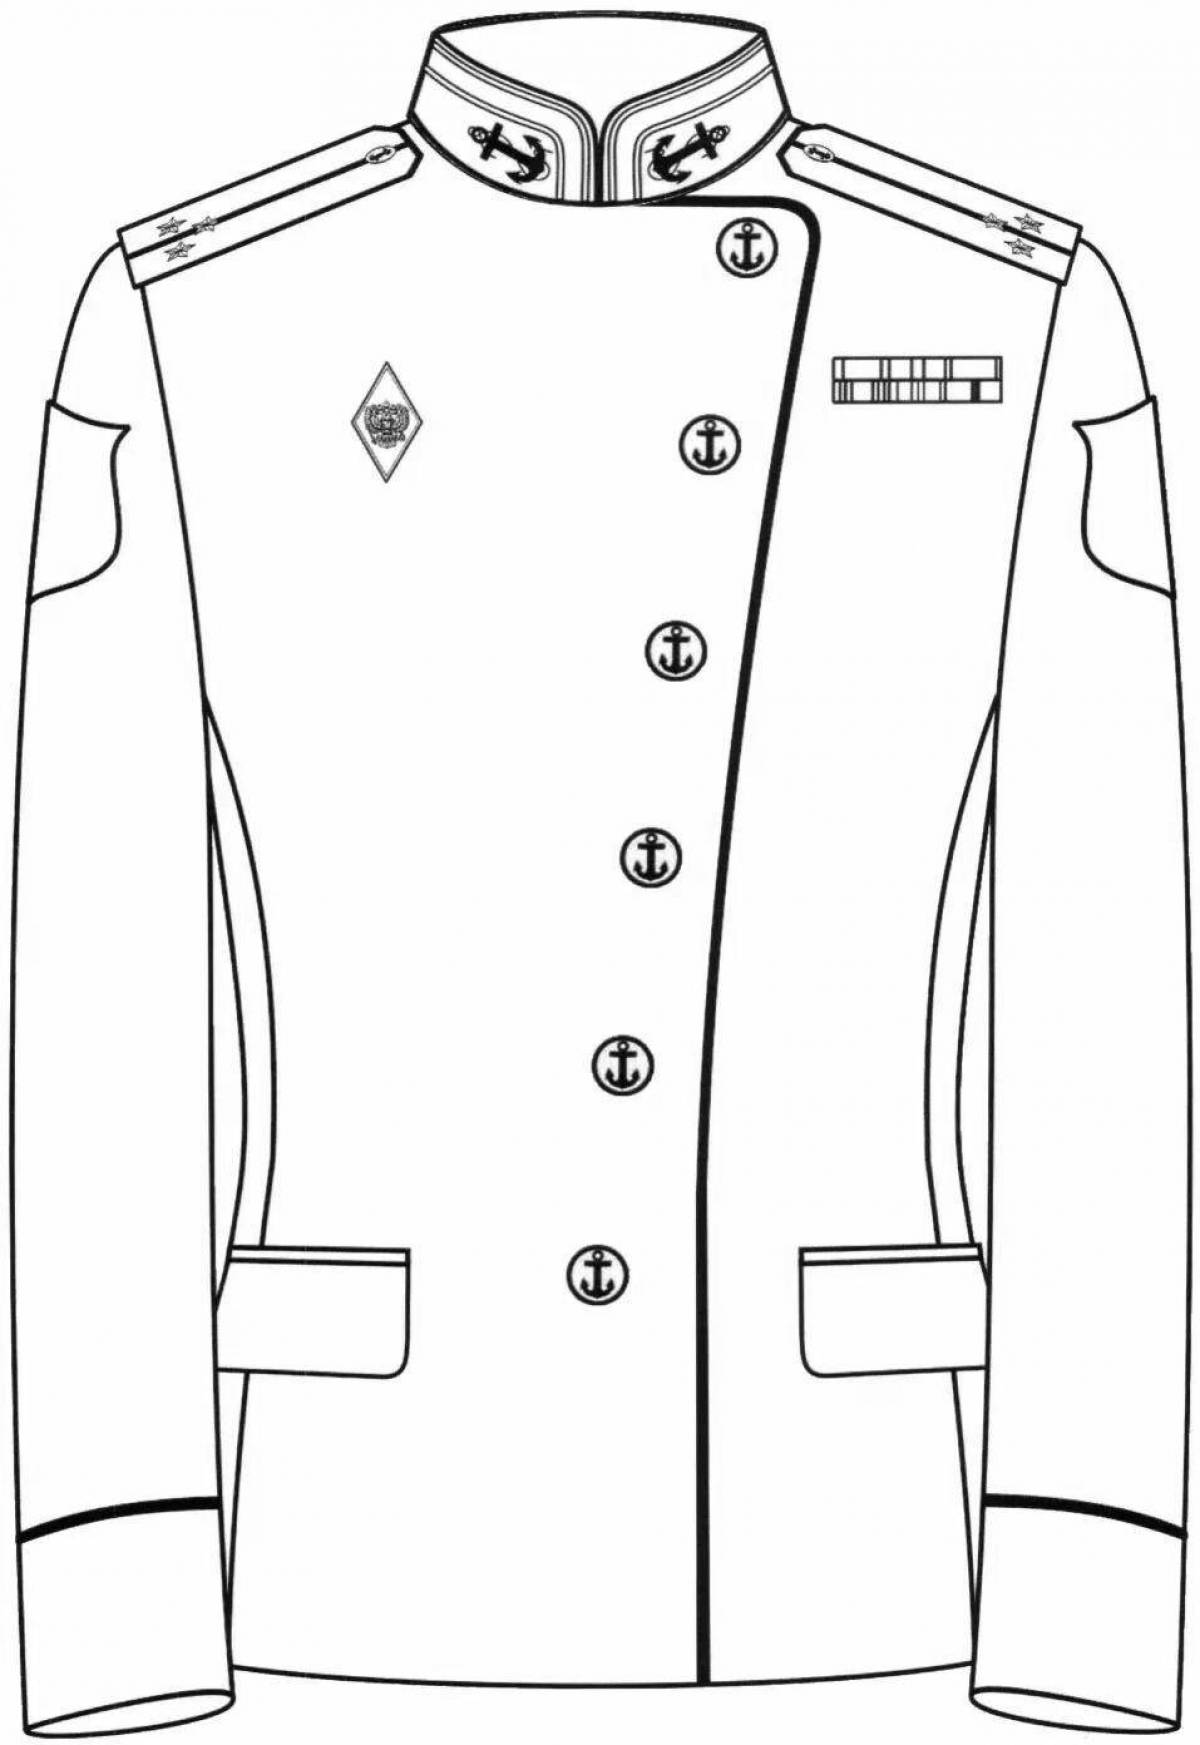 Intricate military uniform coloring book